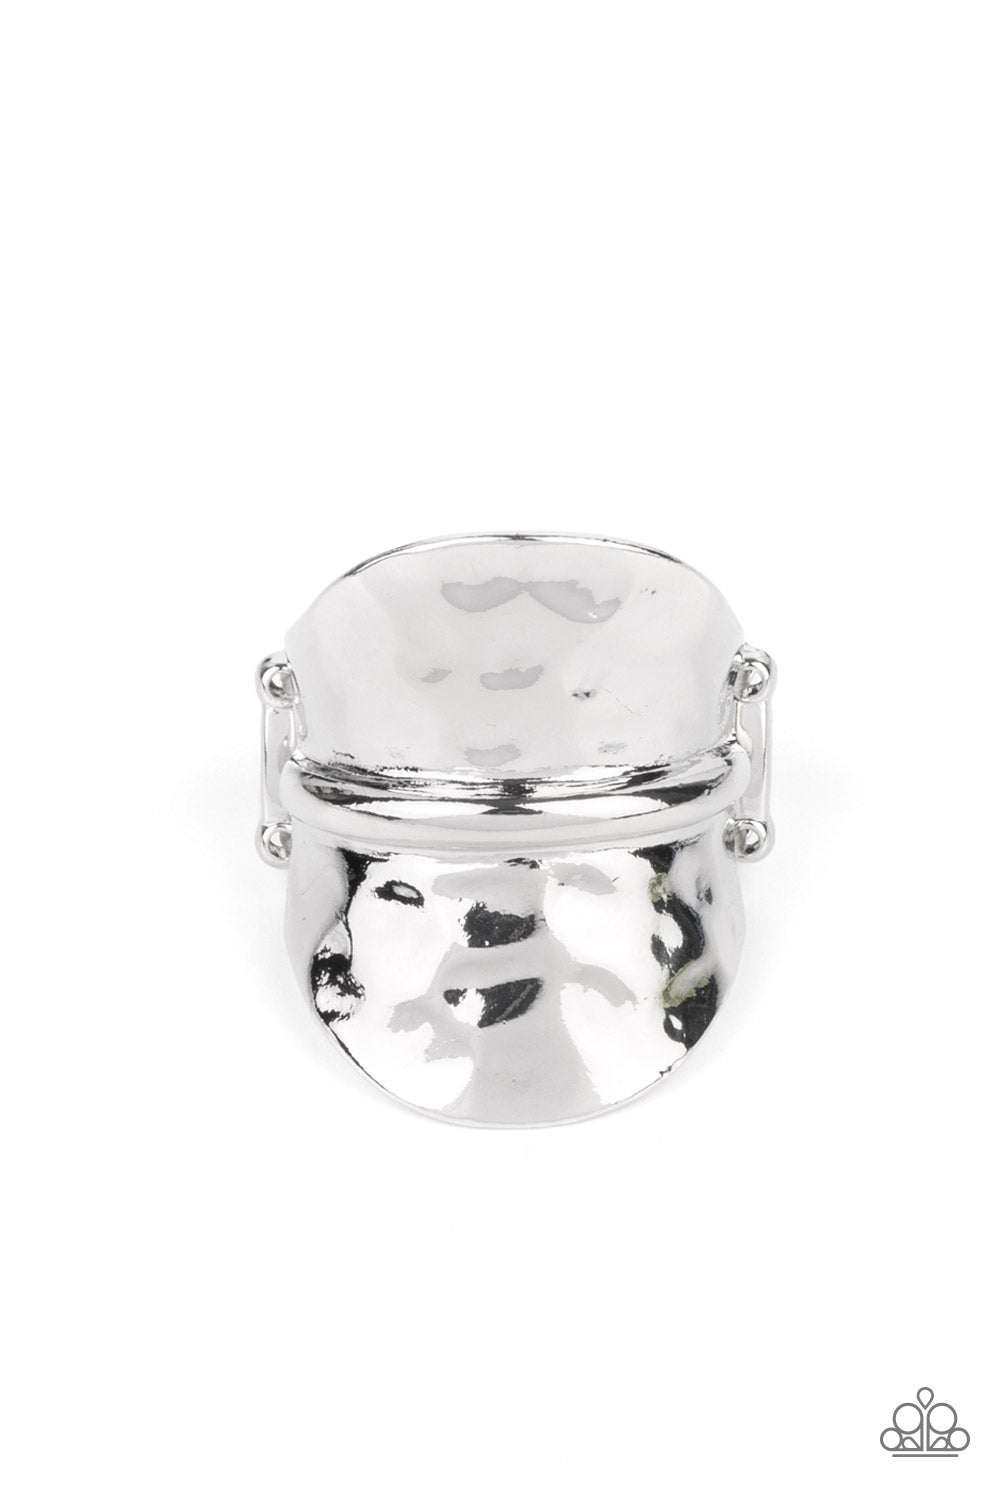 Paparazzi Accessories High Stakes Gleam - Silver Rings featuring a high sheen, a hammered silver disc, divided in half by a raised spine, floats up on each end for a gleaming high stakes finish. Features a stretchy band for a flexible fit.